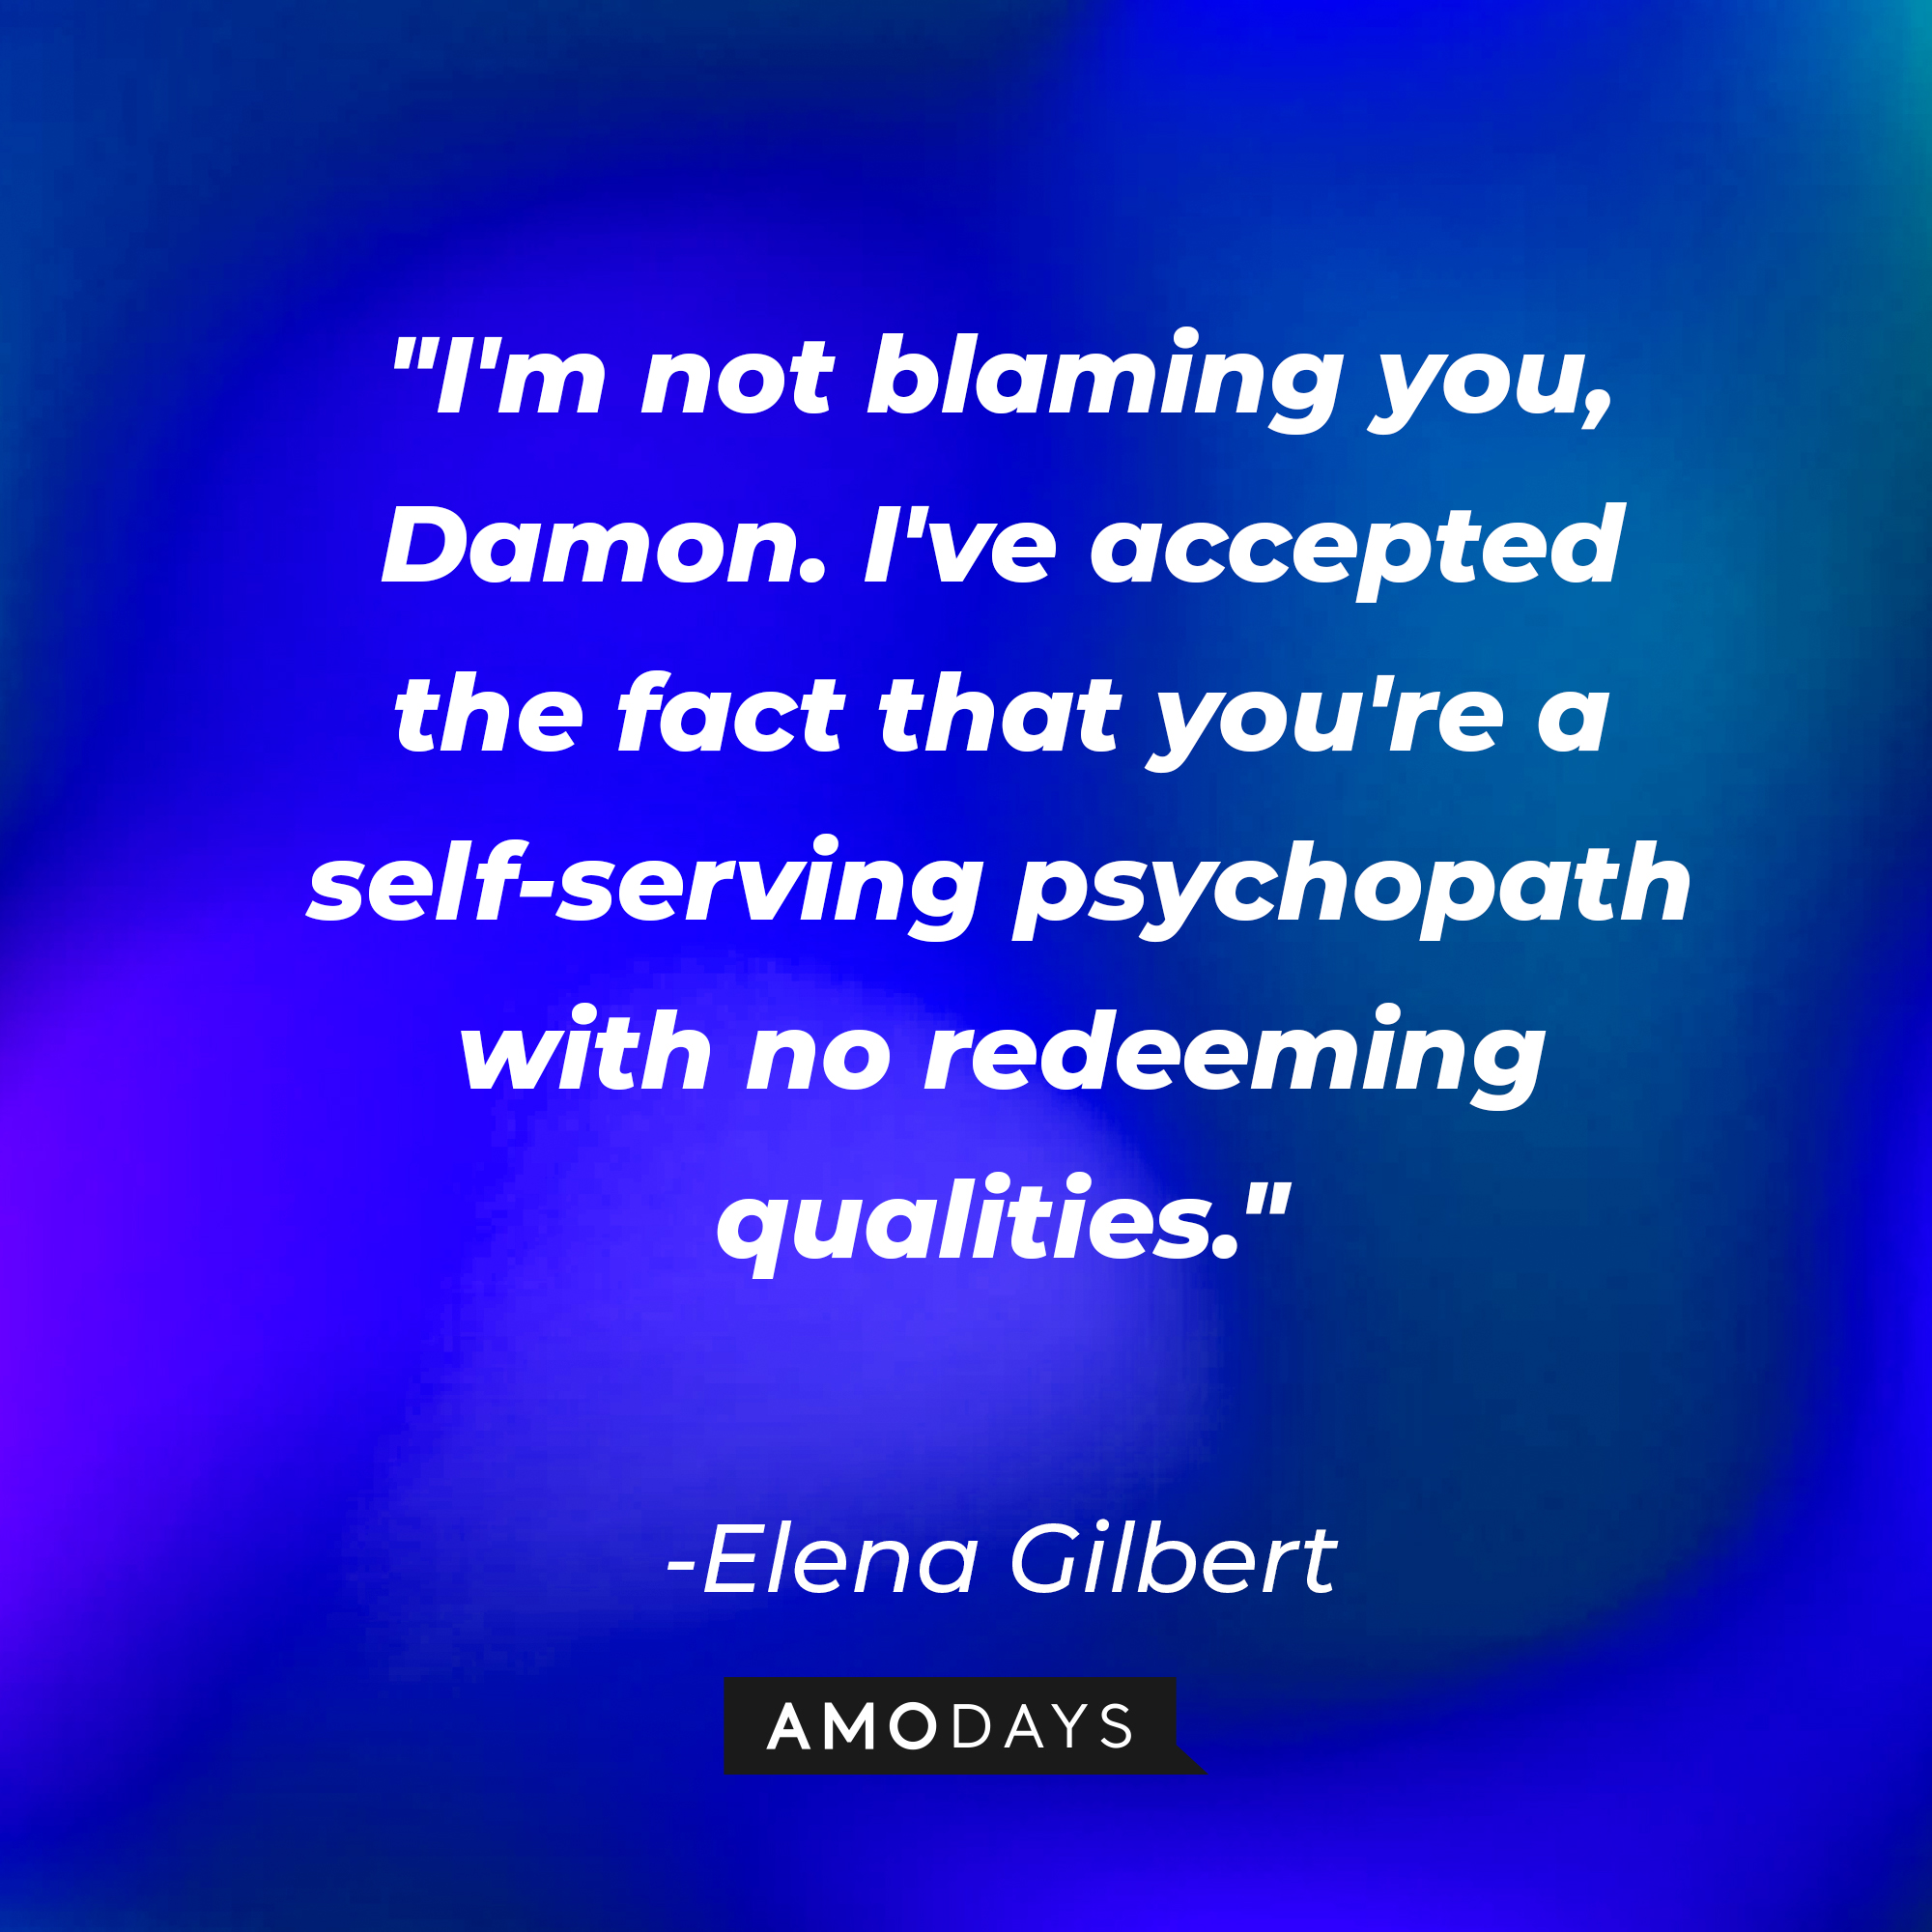 Elena Gilbert's quote: "I'm not blaming you, Damon. I've accepted the fact that you're a self-serving psychopath with no redeeming qualities." | Image: AmoDays